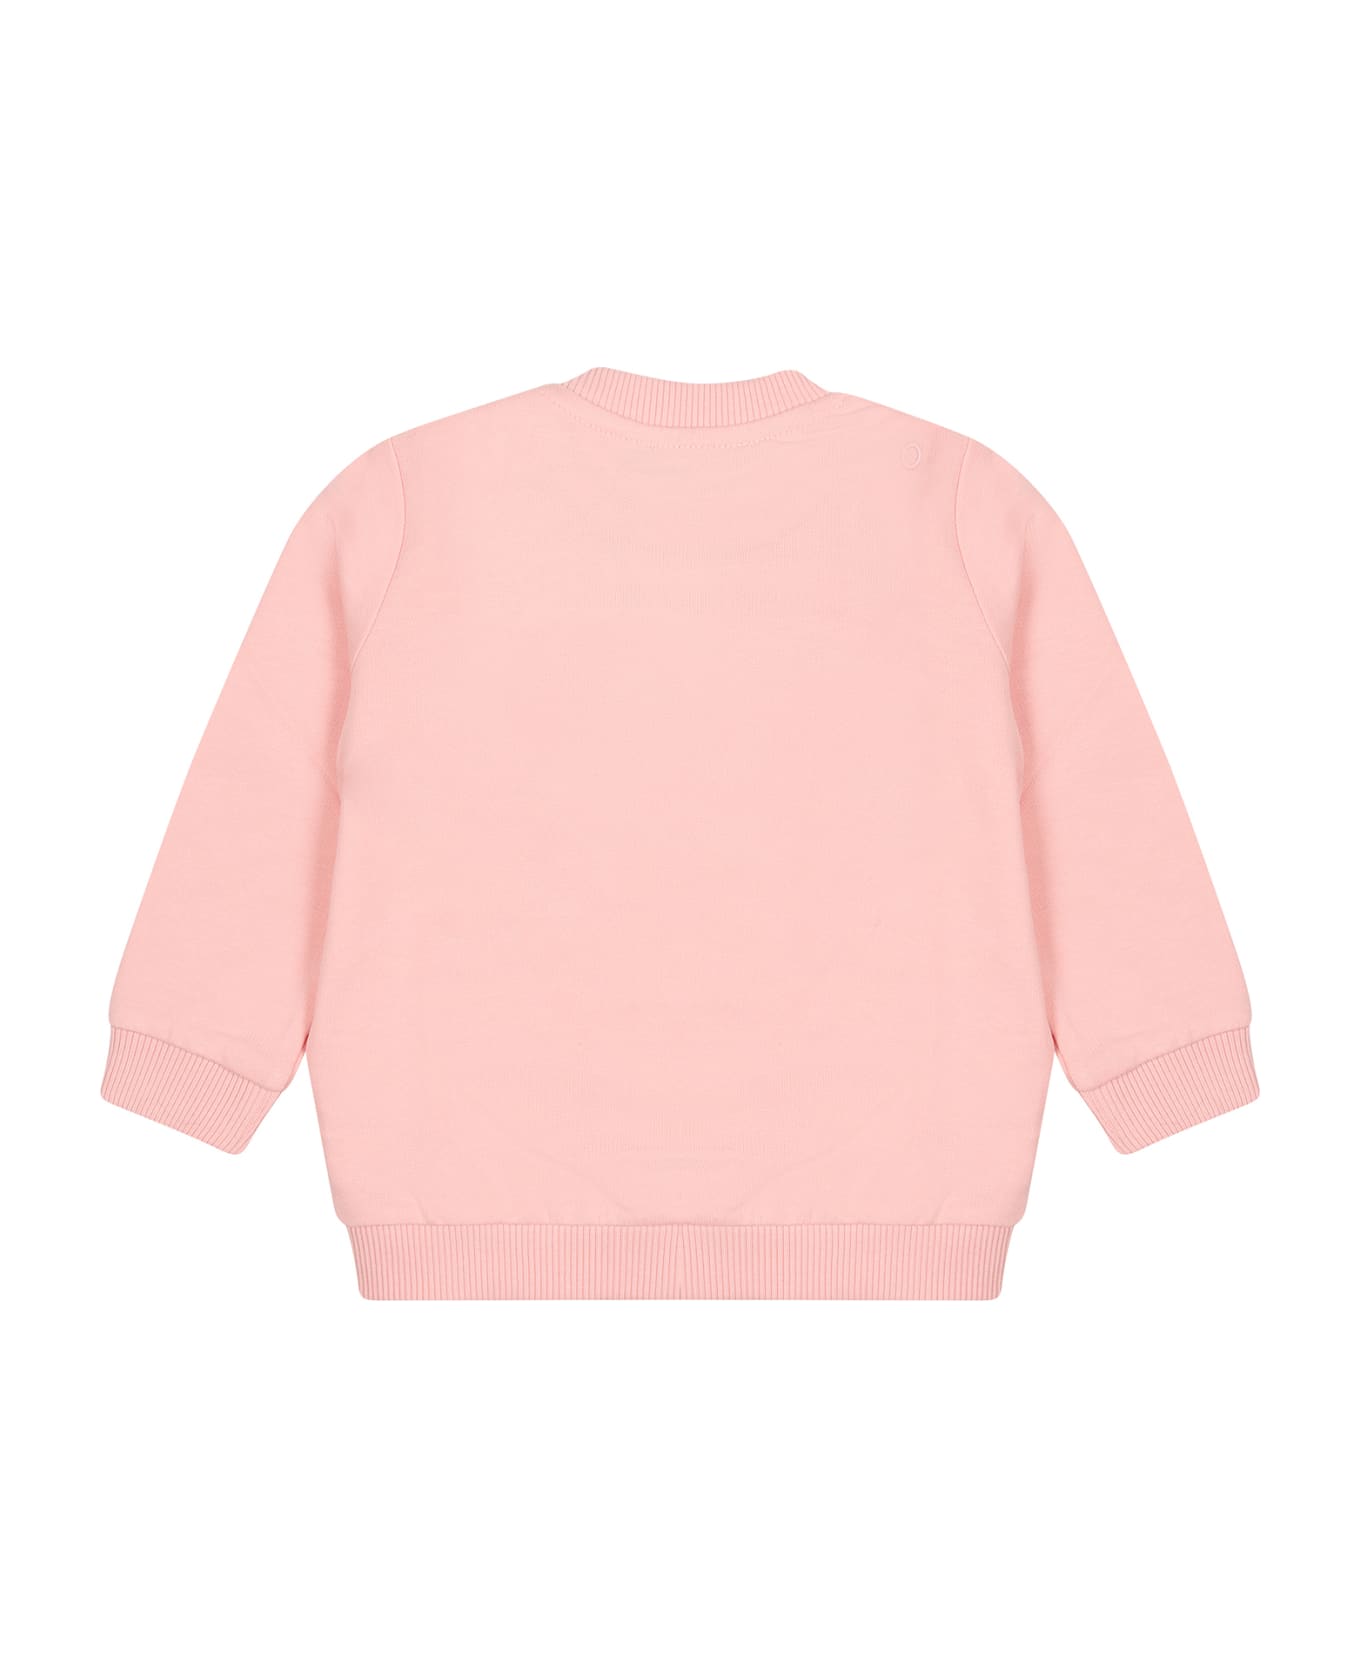 Moschino Pink Sweatshirt For Babies With Teddy Bears And Logo - Pink